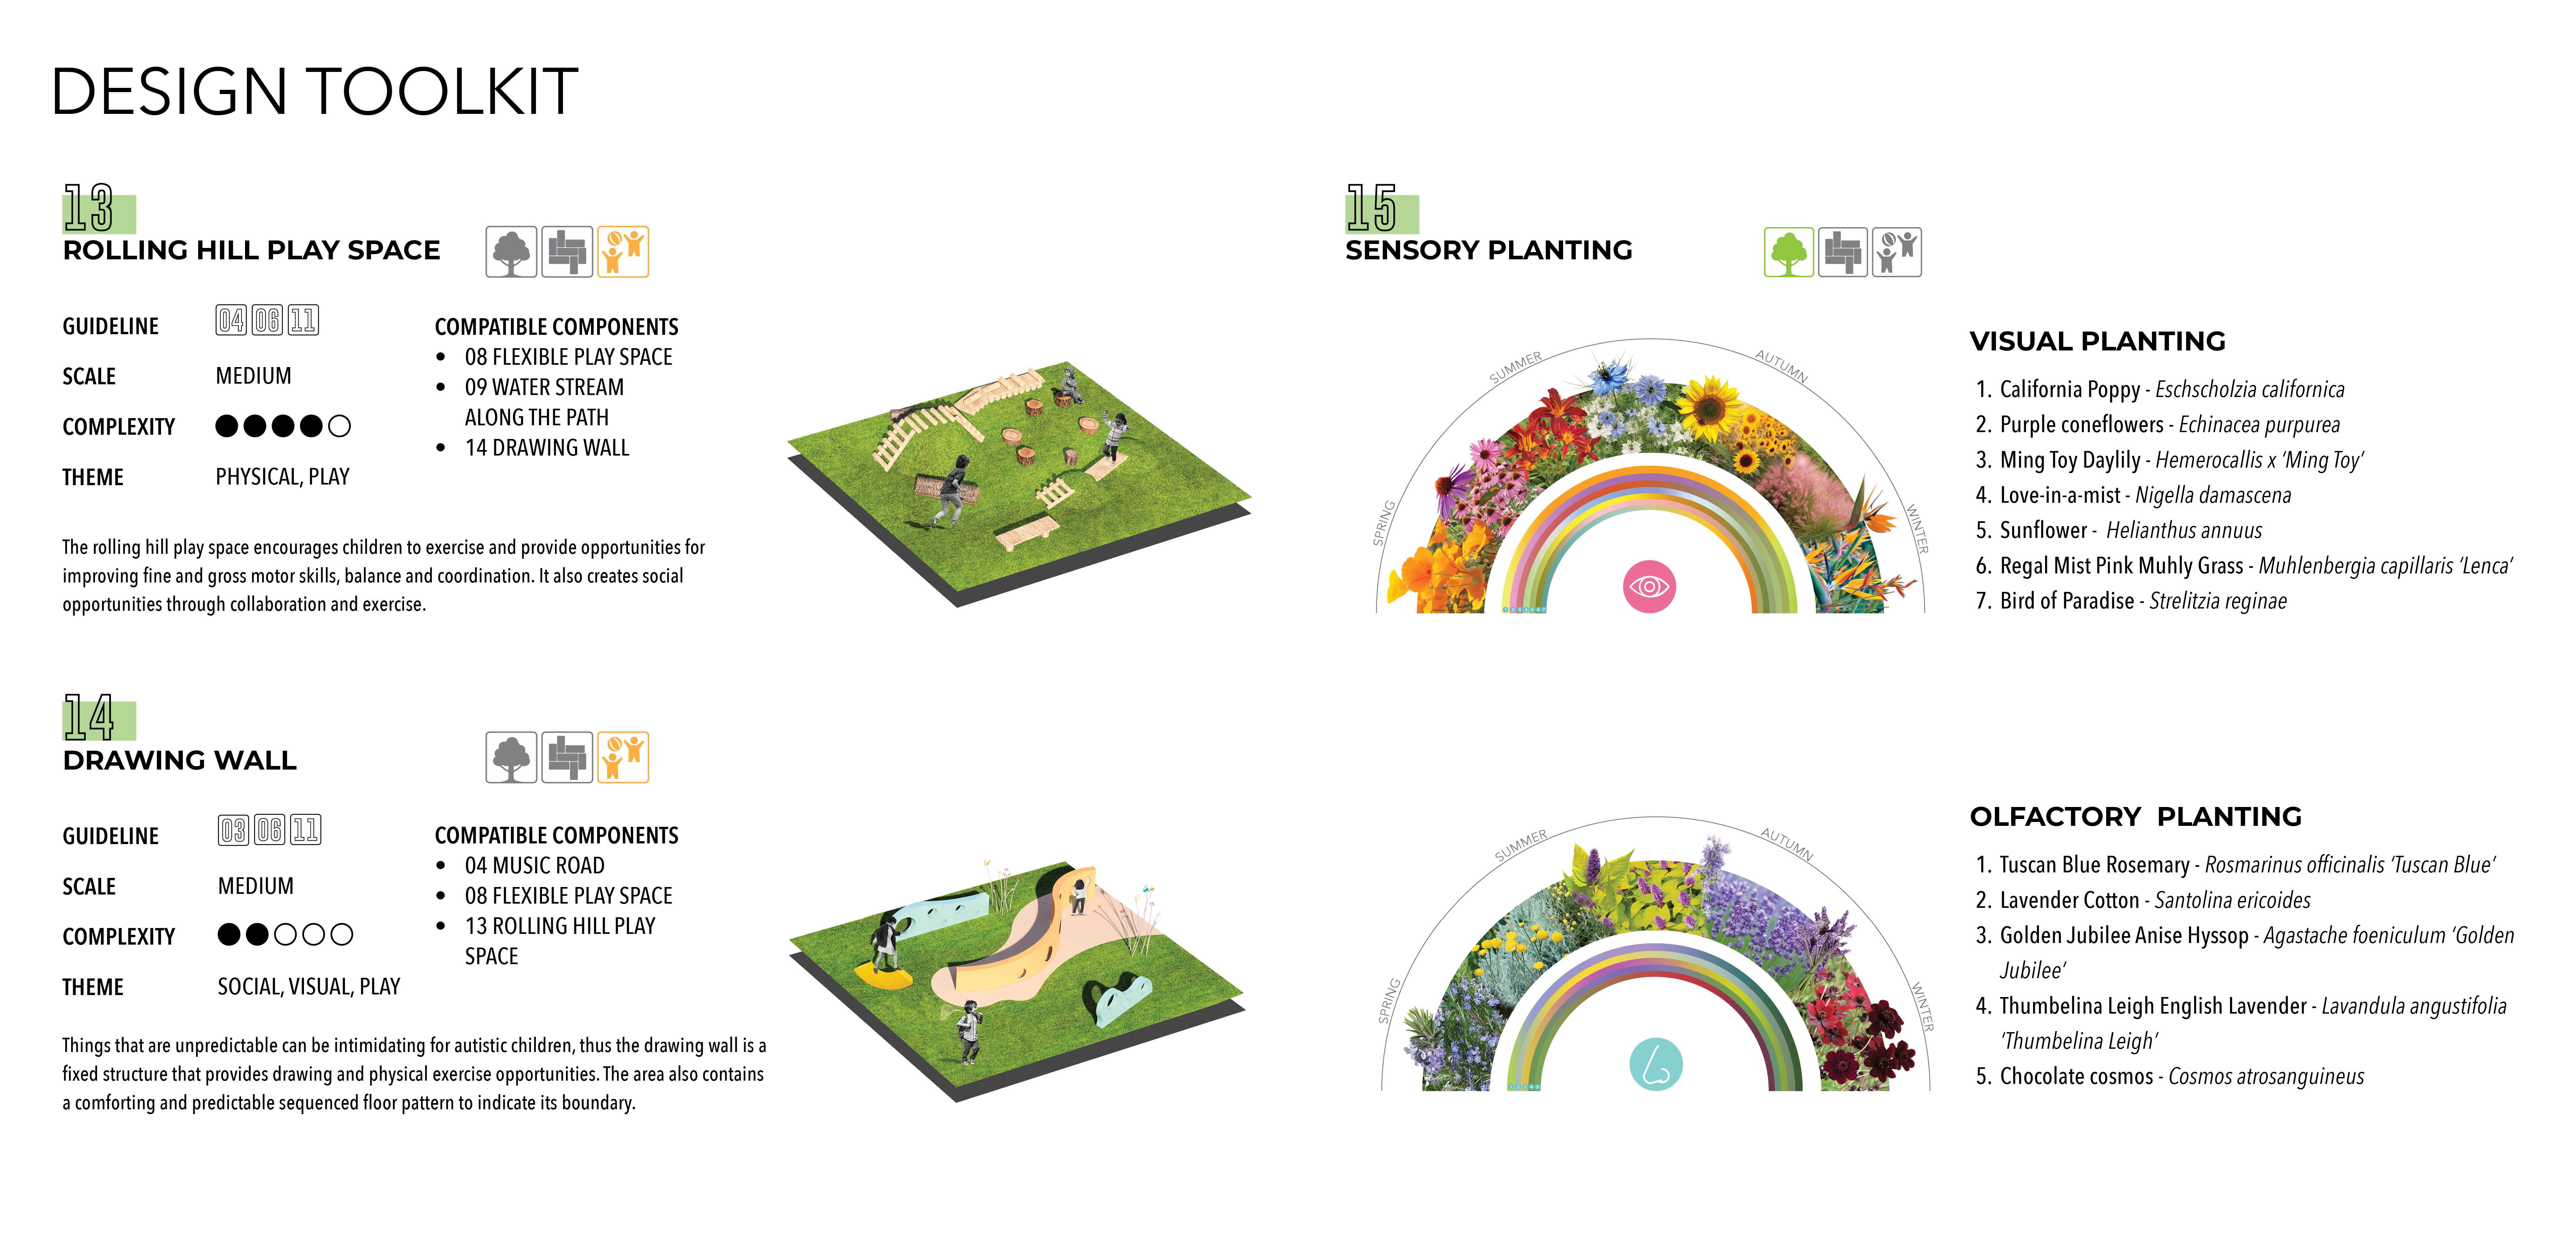 Design Toolkit and Sensory Planting Guide (Visual and Olfactory)